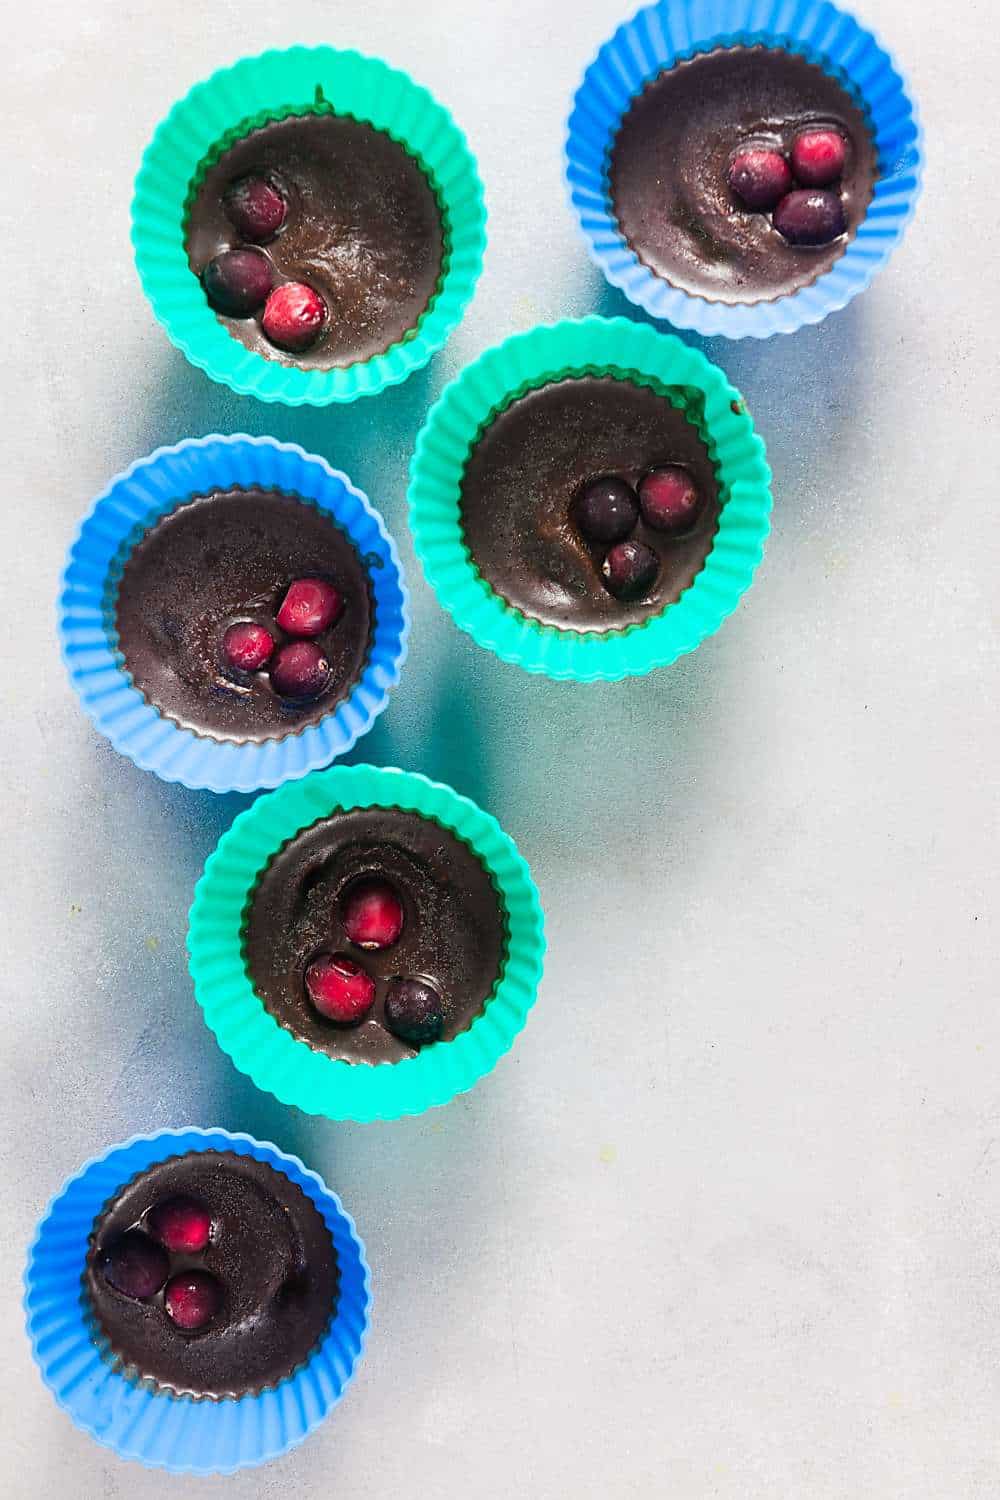 Coconut Cranberry Chocolate Cups (Paleo, Dairy Free)